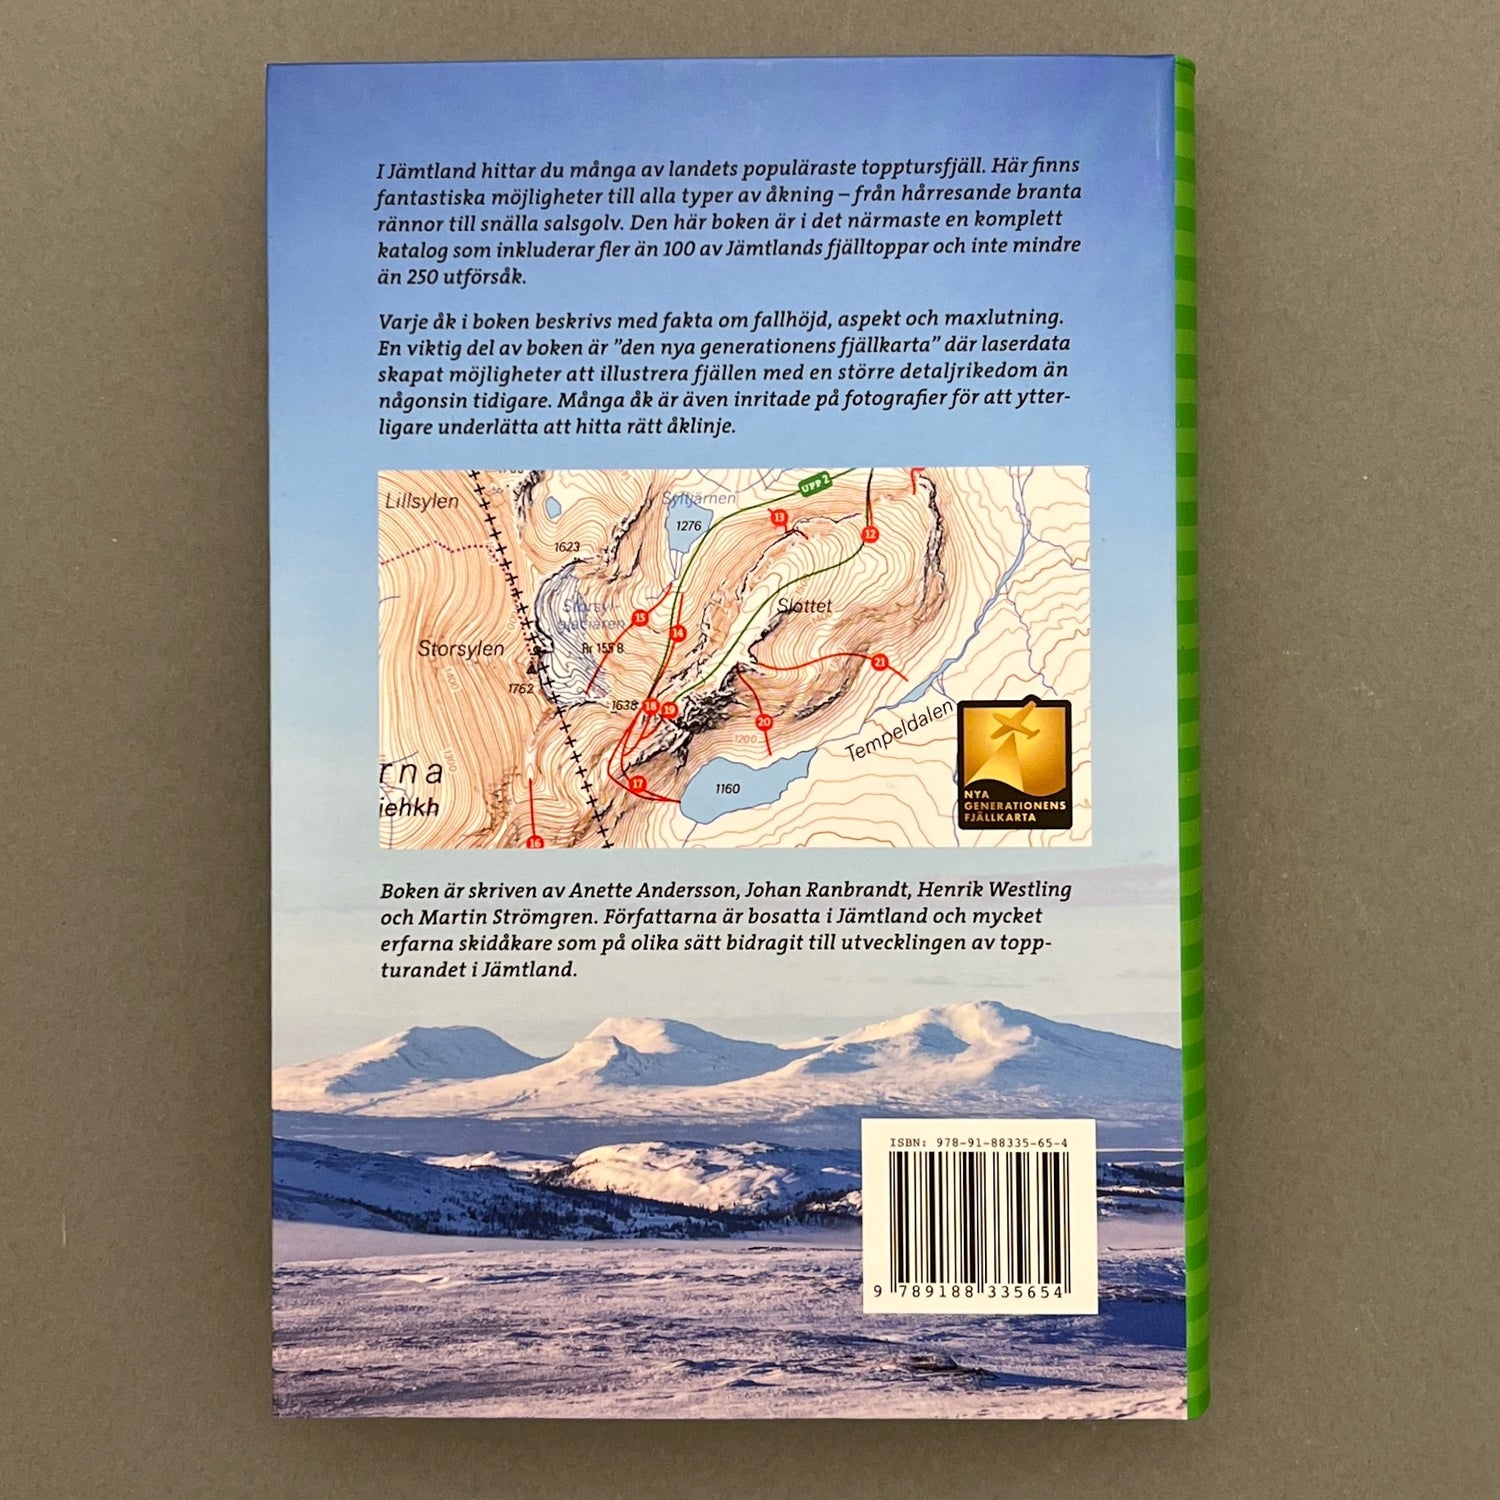 A blue colored back of a book with a picture of three mountains, a map and a summary of the same book laying on a gray background